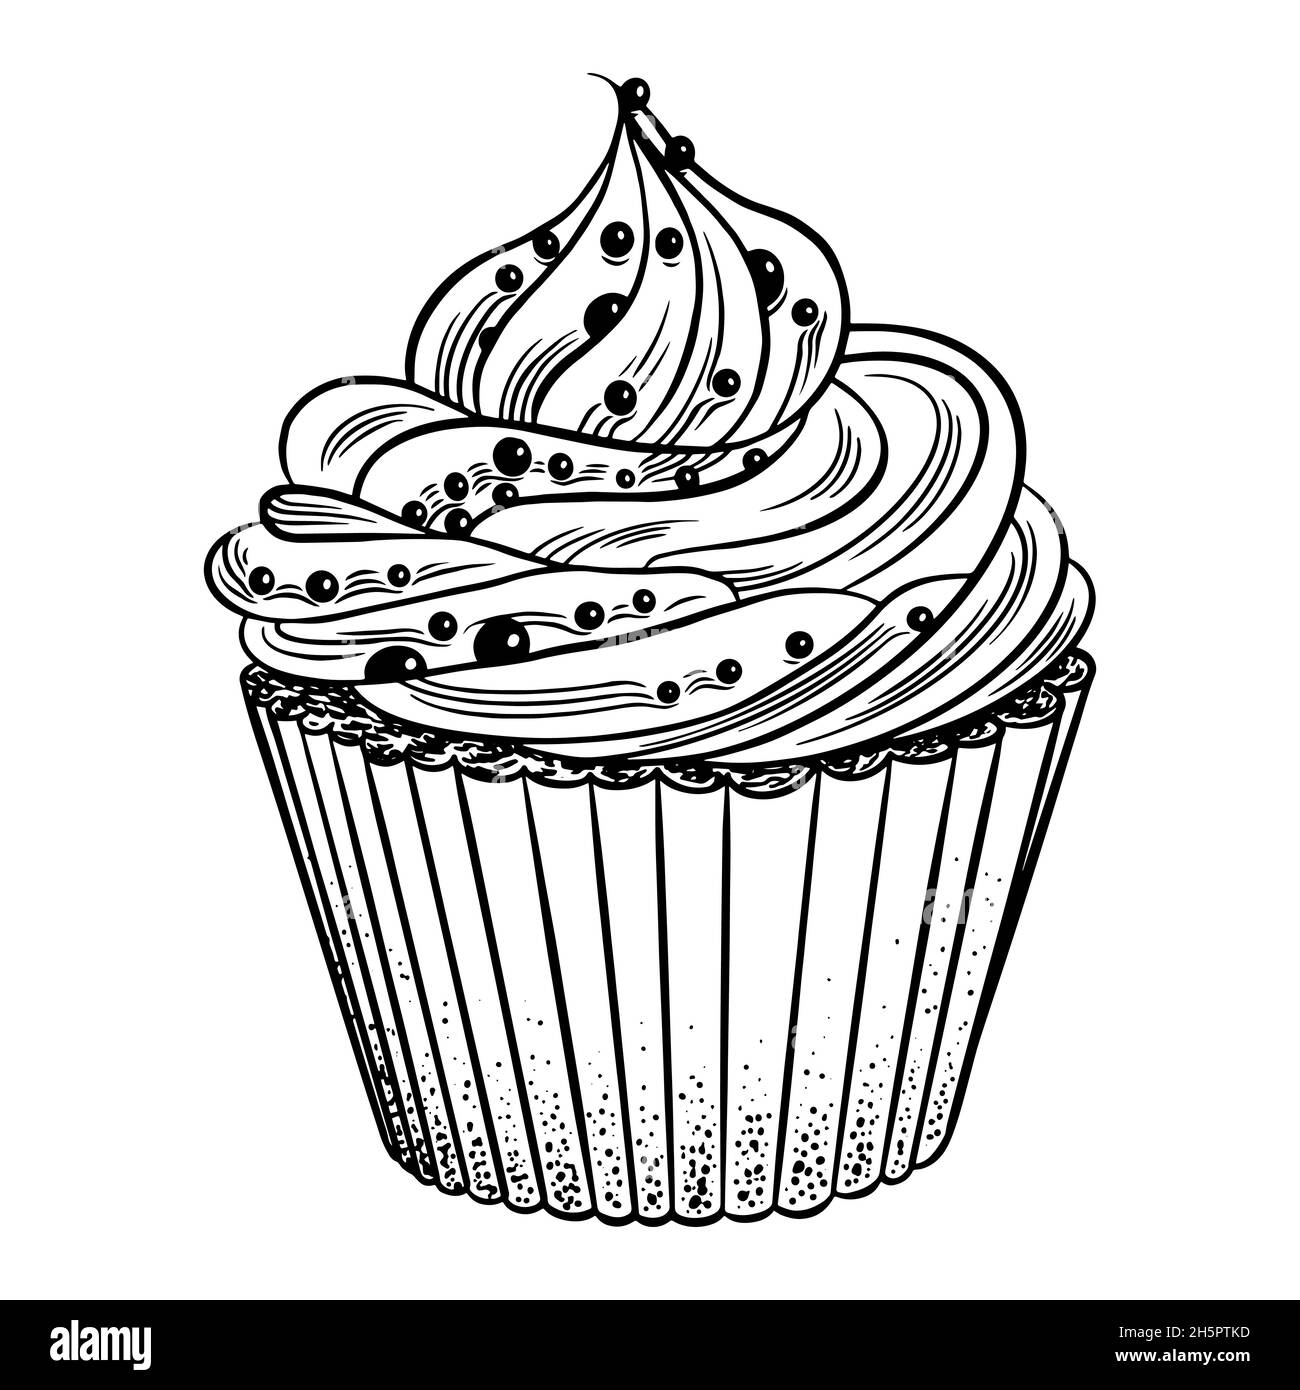 Daily Doodle: Cupcake Drawing - THAT ART TEACHER